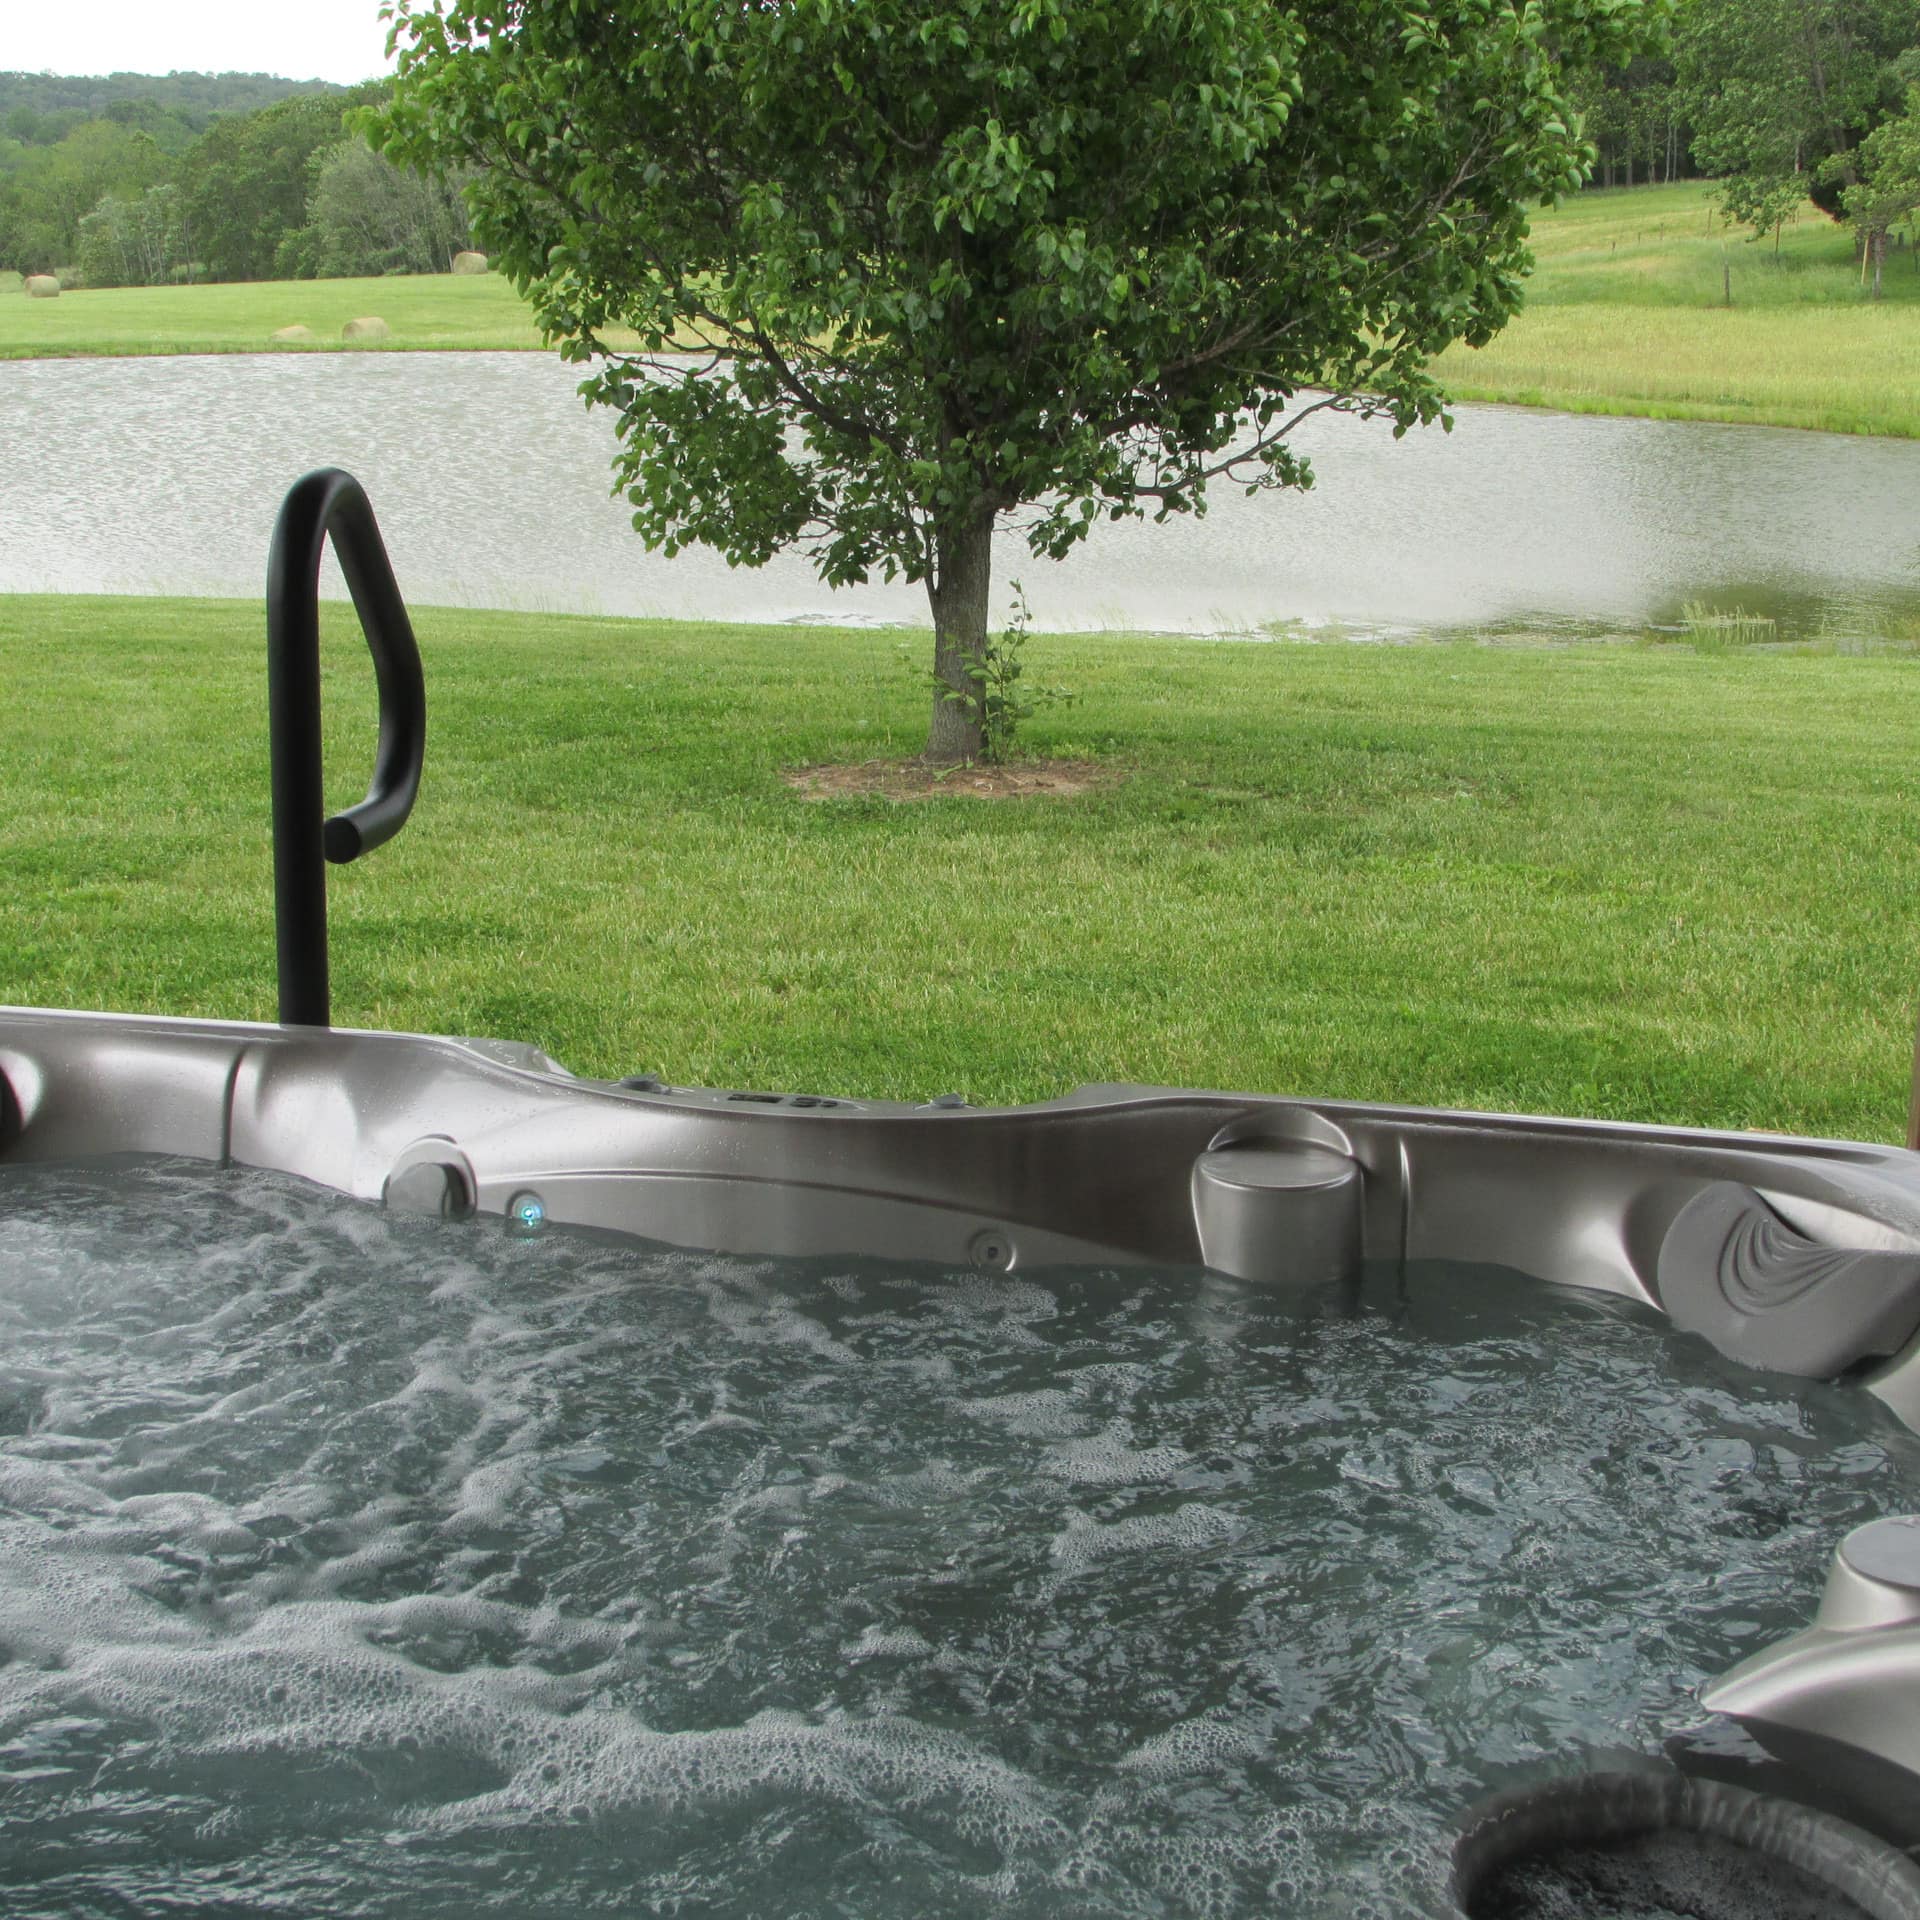 Hot tub overlooking lawns, trees, and a pond